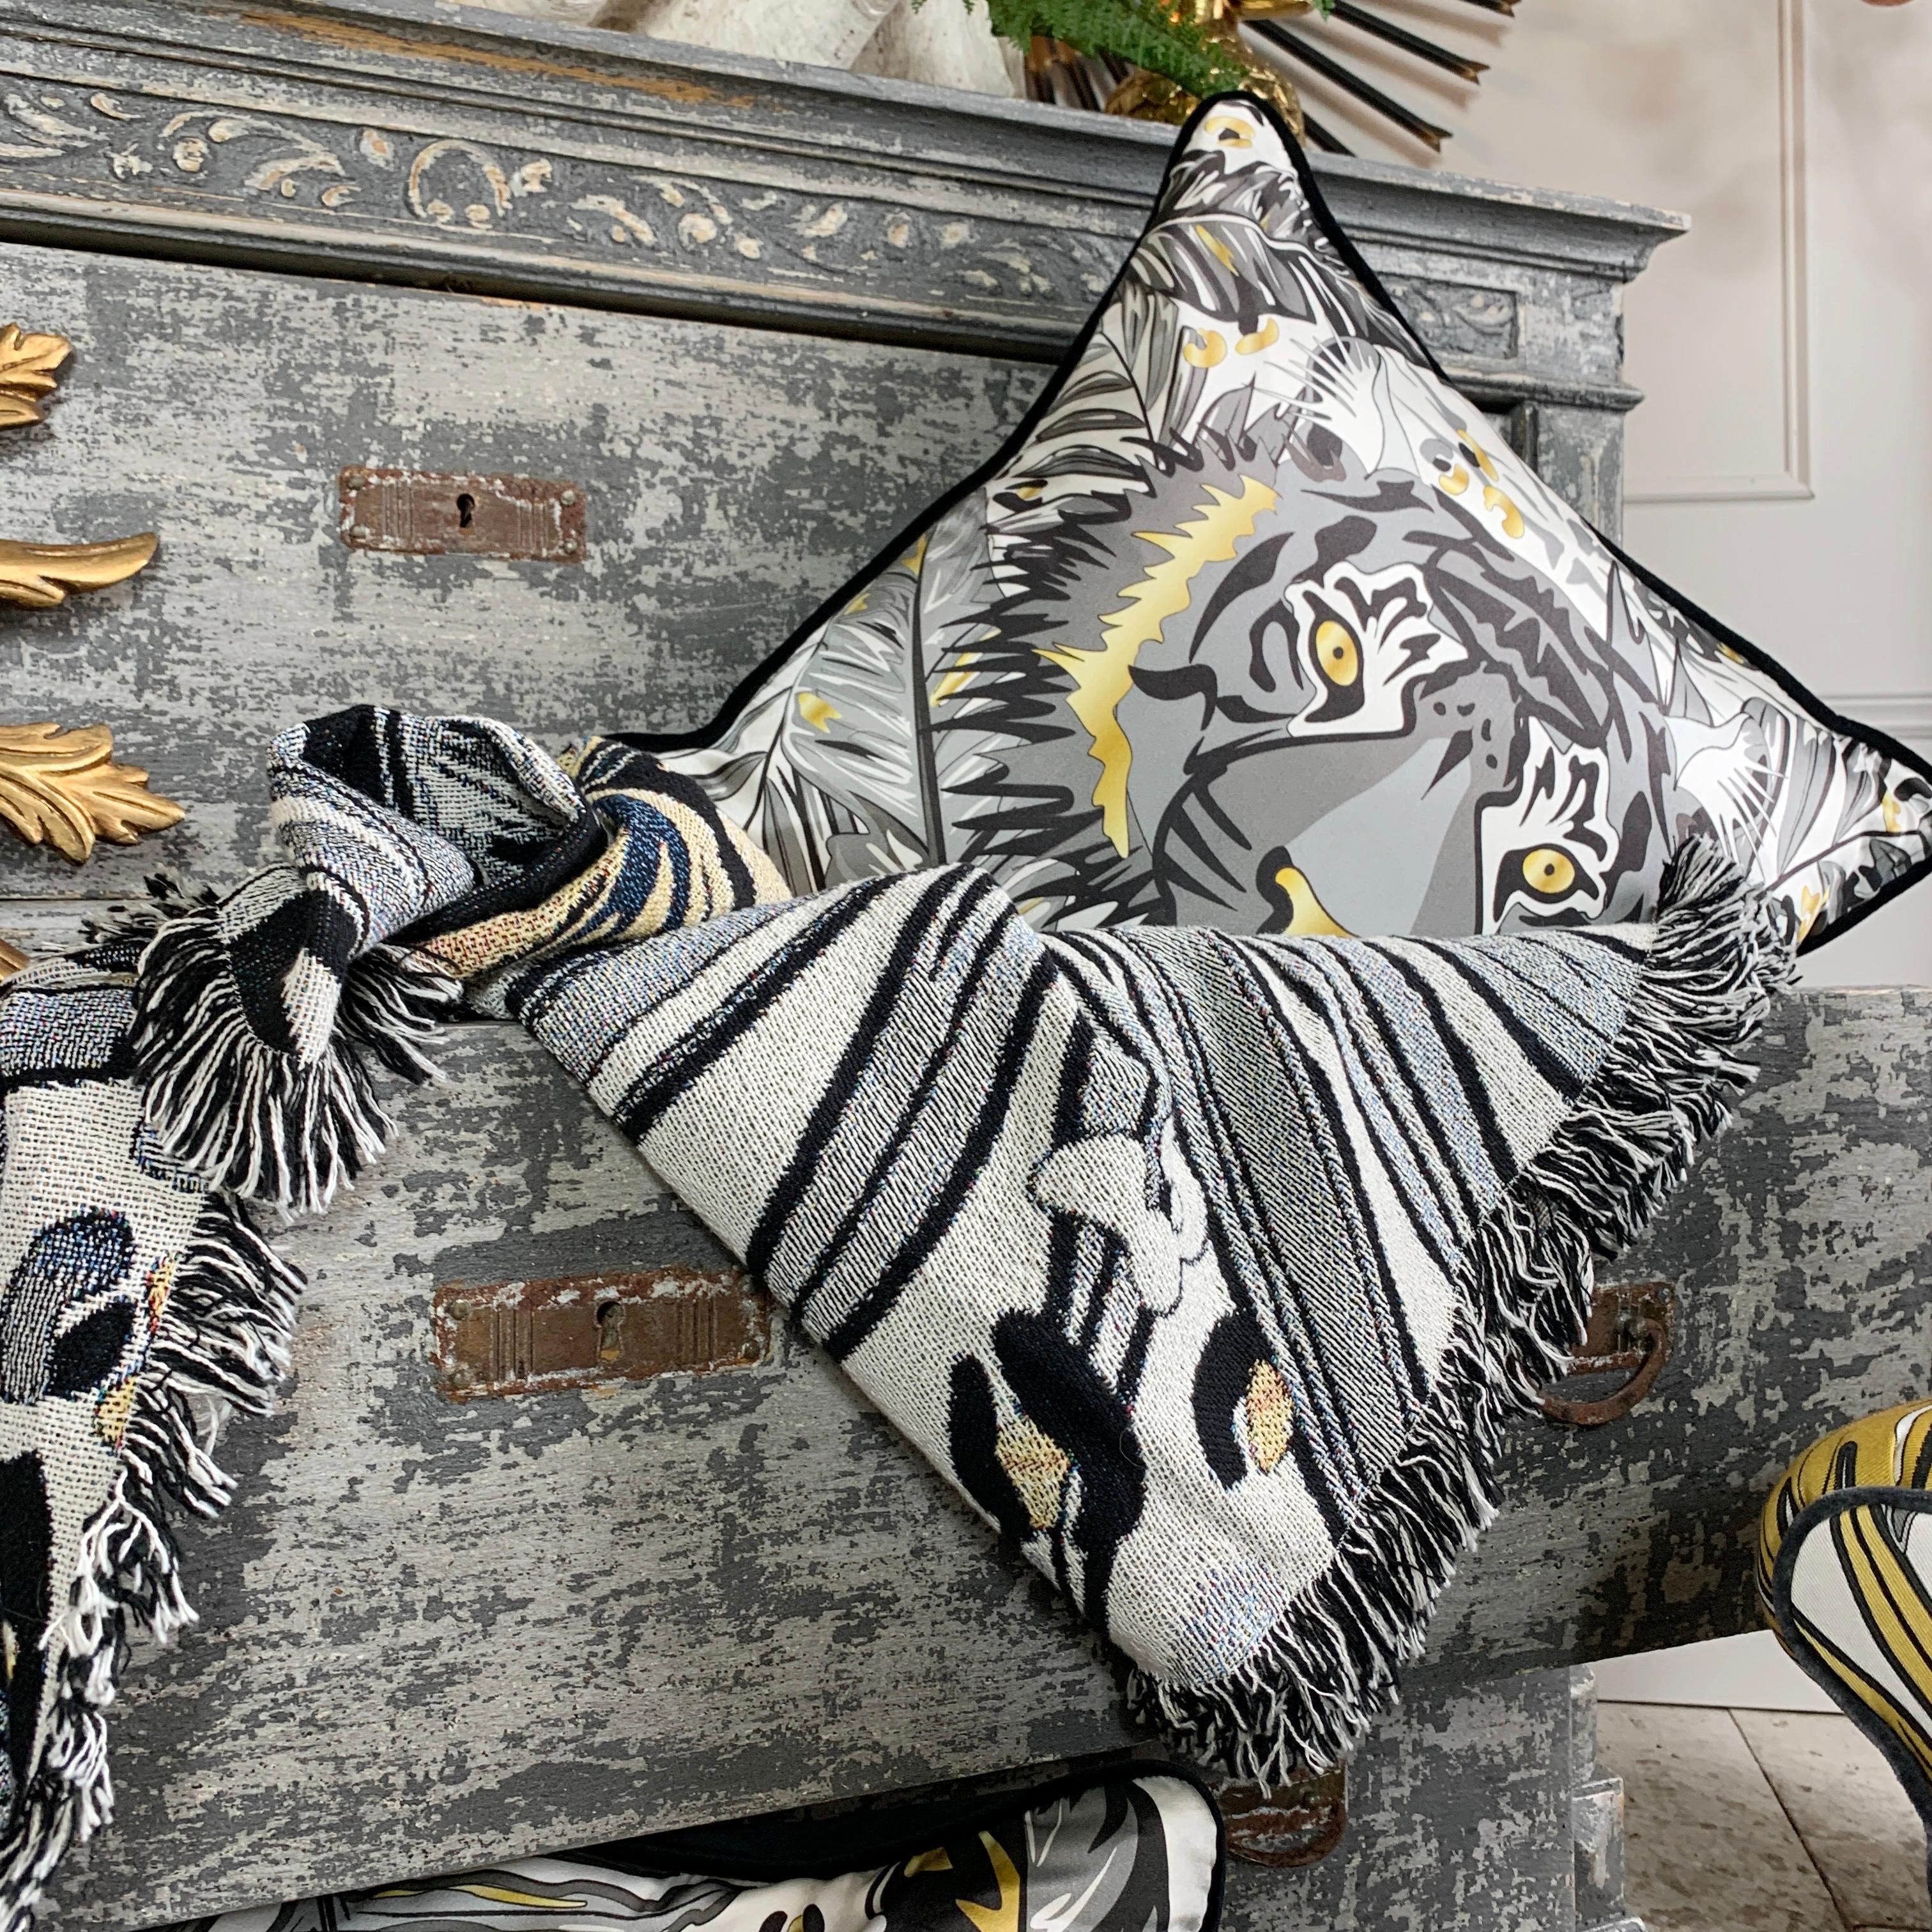 Be bold and fearless with our luxury silk 'Tiger' cushion from our Tropics range

This luxurious 100% silk cushion has a rich cotton velvet back and piped edge

Inspired by these iconic beautiful big cats and the lush tropical jungle leaves from the